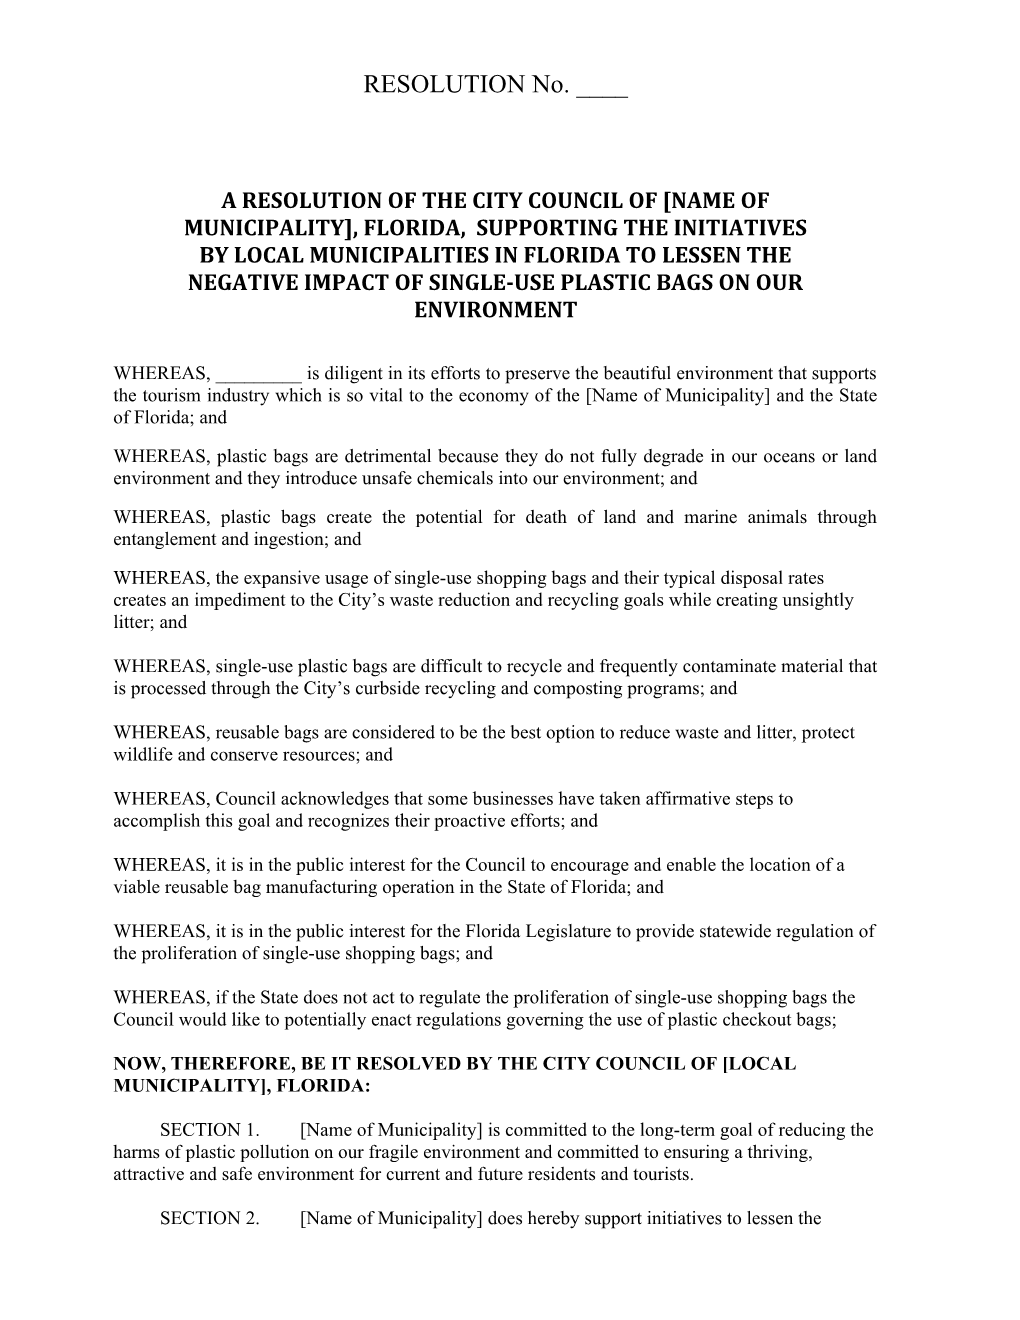 A Resolution of the City Council of Name of Municipality , Florida, Supporting the Initiatives